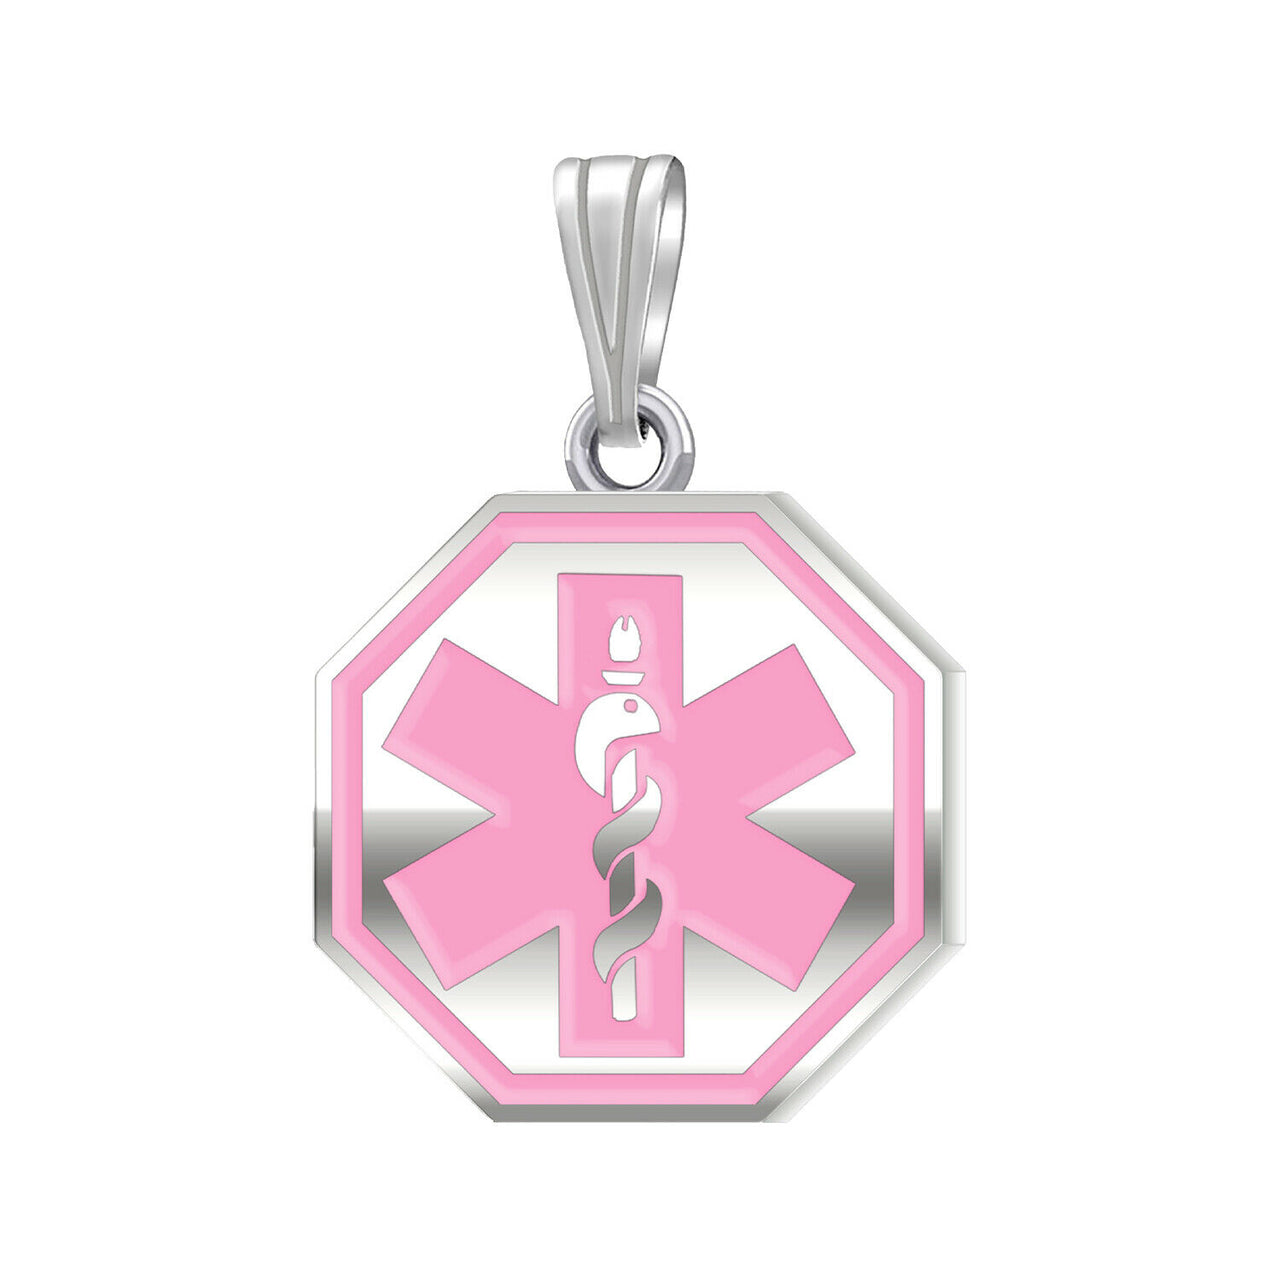 Ladies 925 Sterling Silver Octagon Medical Pendant, 21.5mm